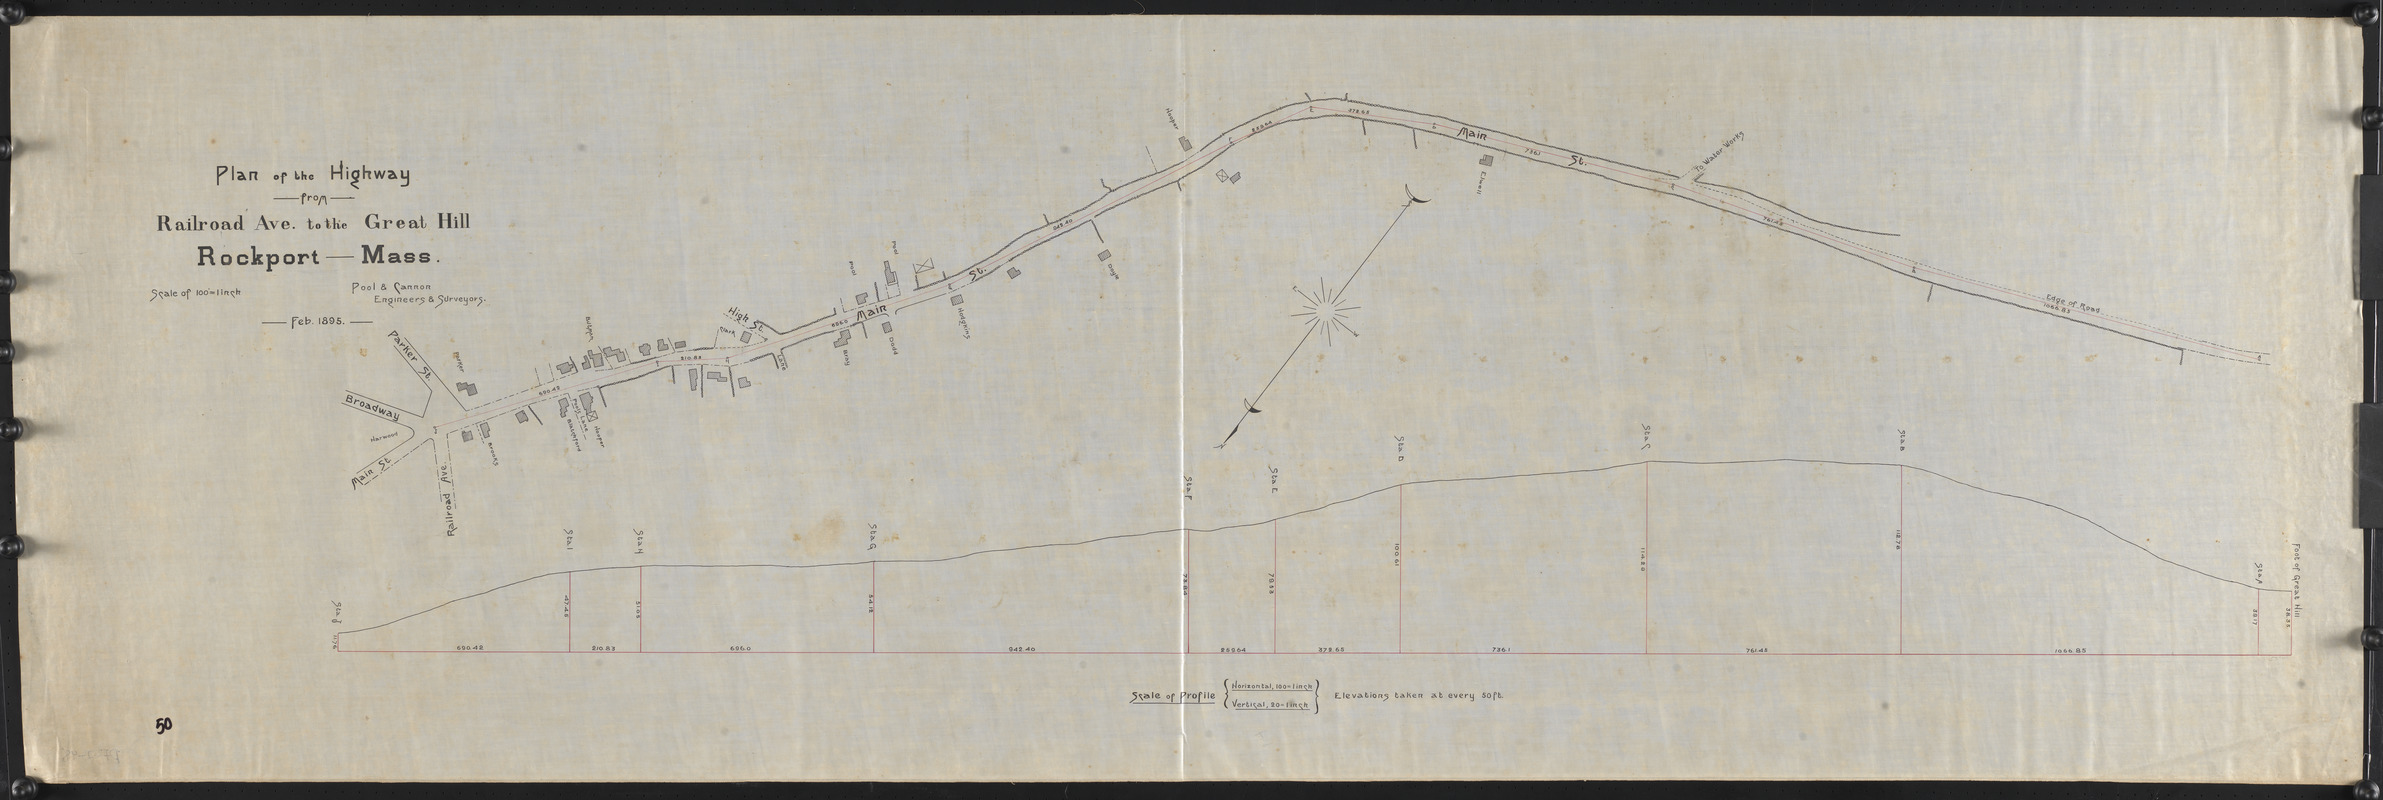 Plan of the highway from Railroad Ave. to the Great Hill, Rockport, Mass.